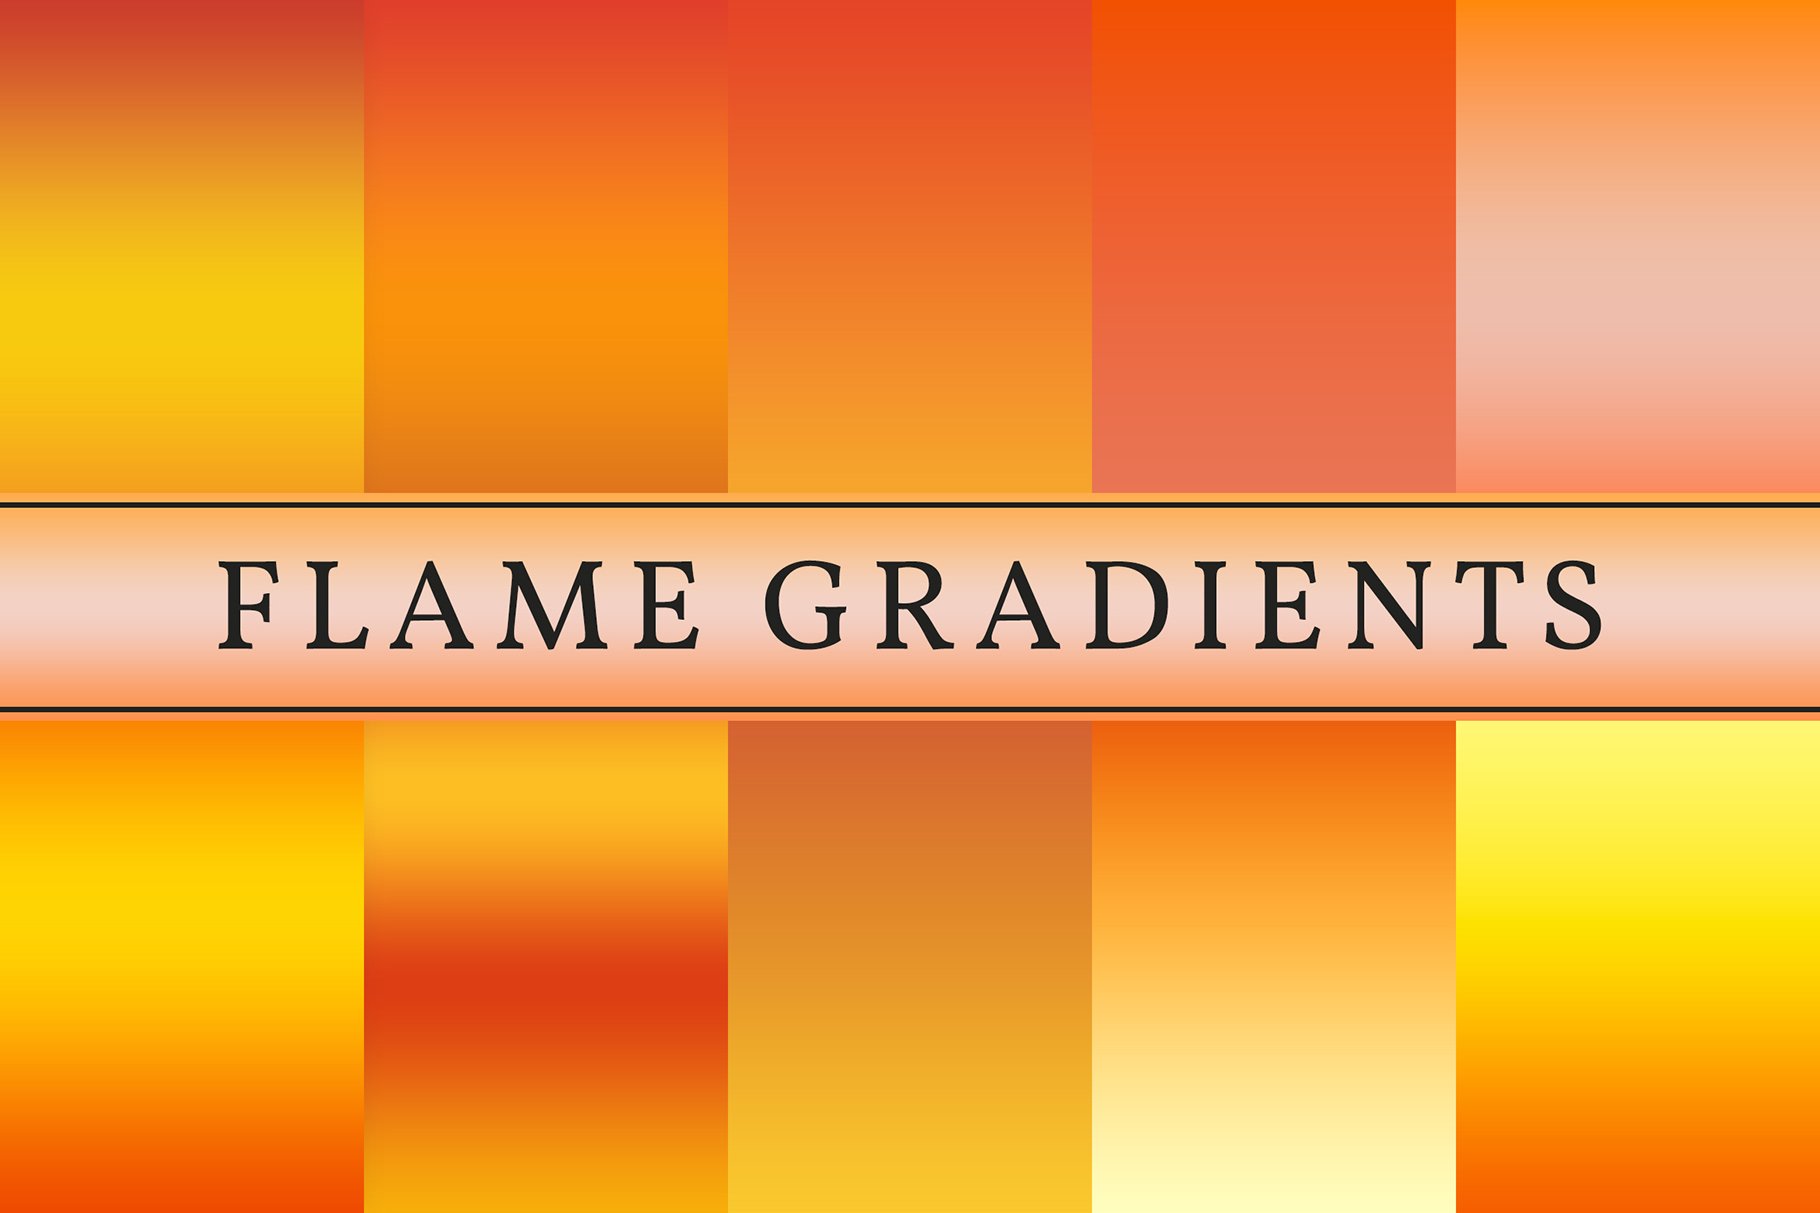 Flame Gradients cover image.